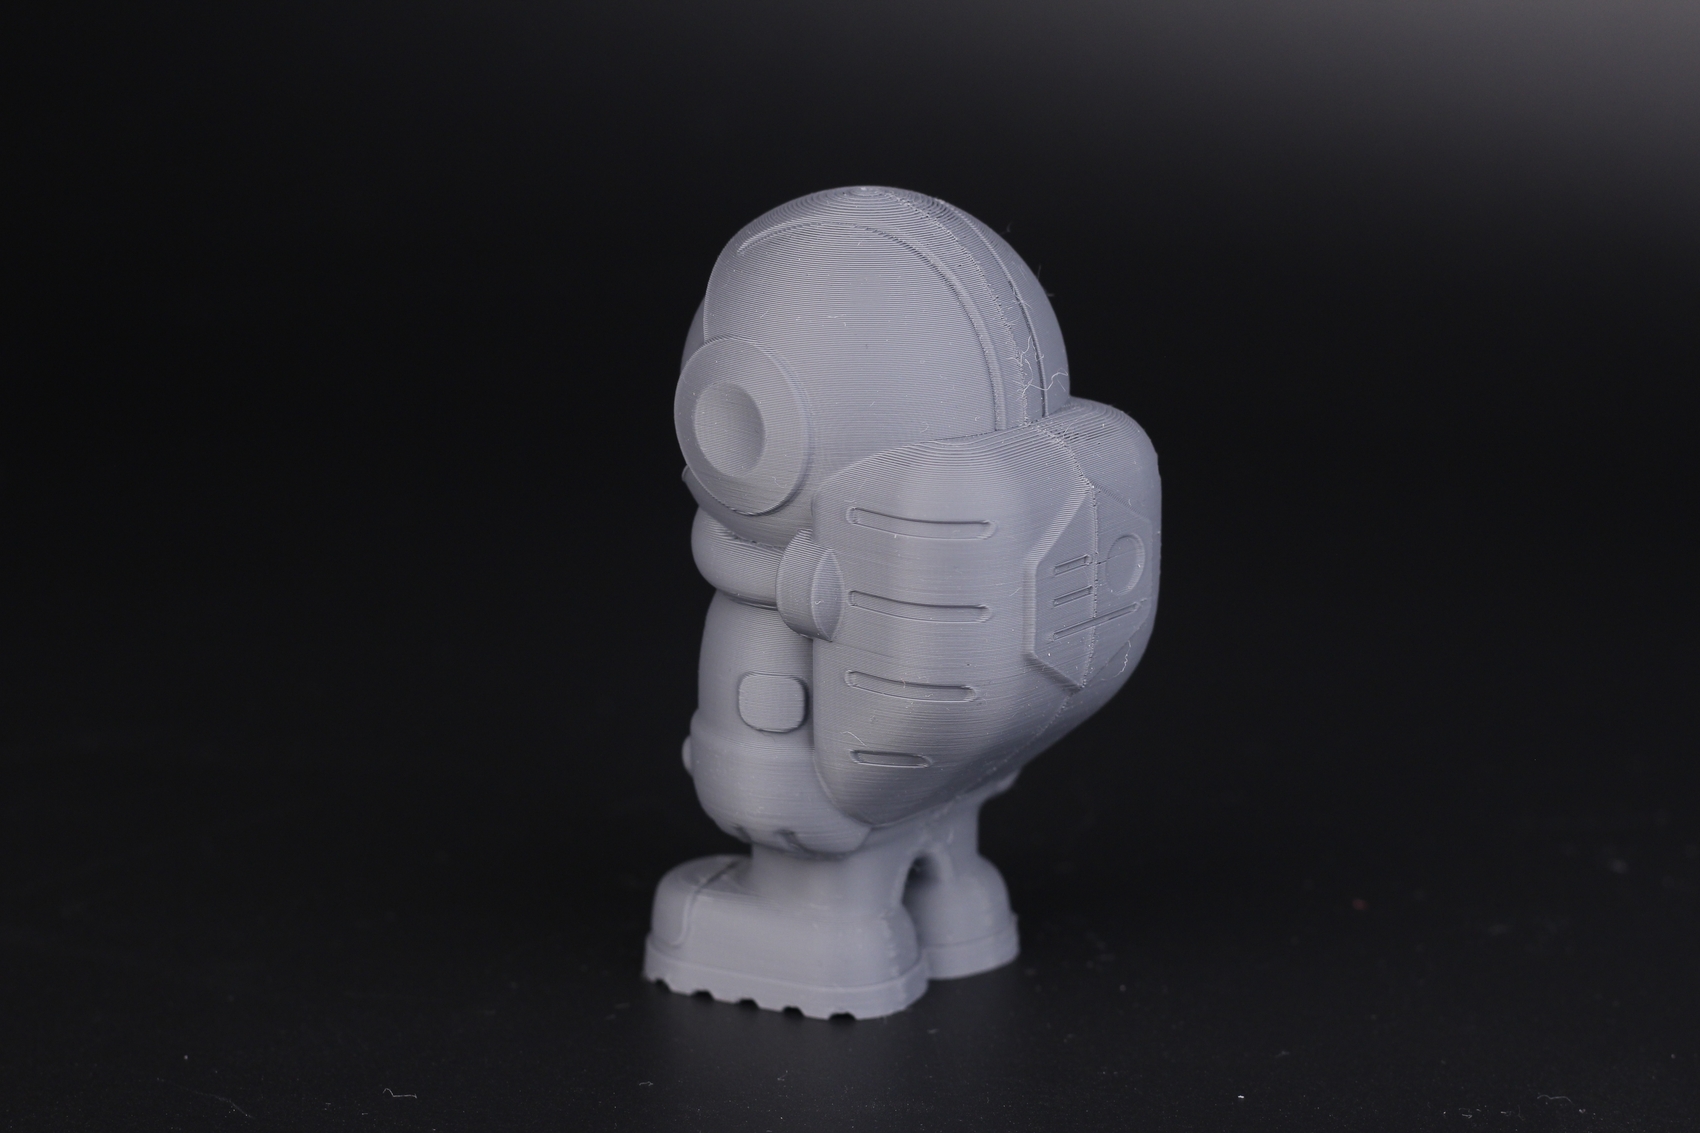 Phil A Ment printed on Ender 3 S1 Pro3 | Creality Ender 3 S1 Pro Review: The Ultimate Ender 3